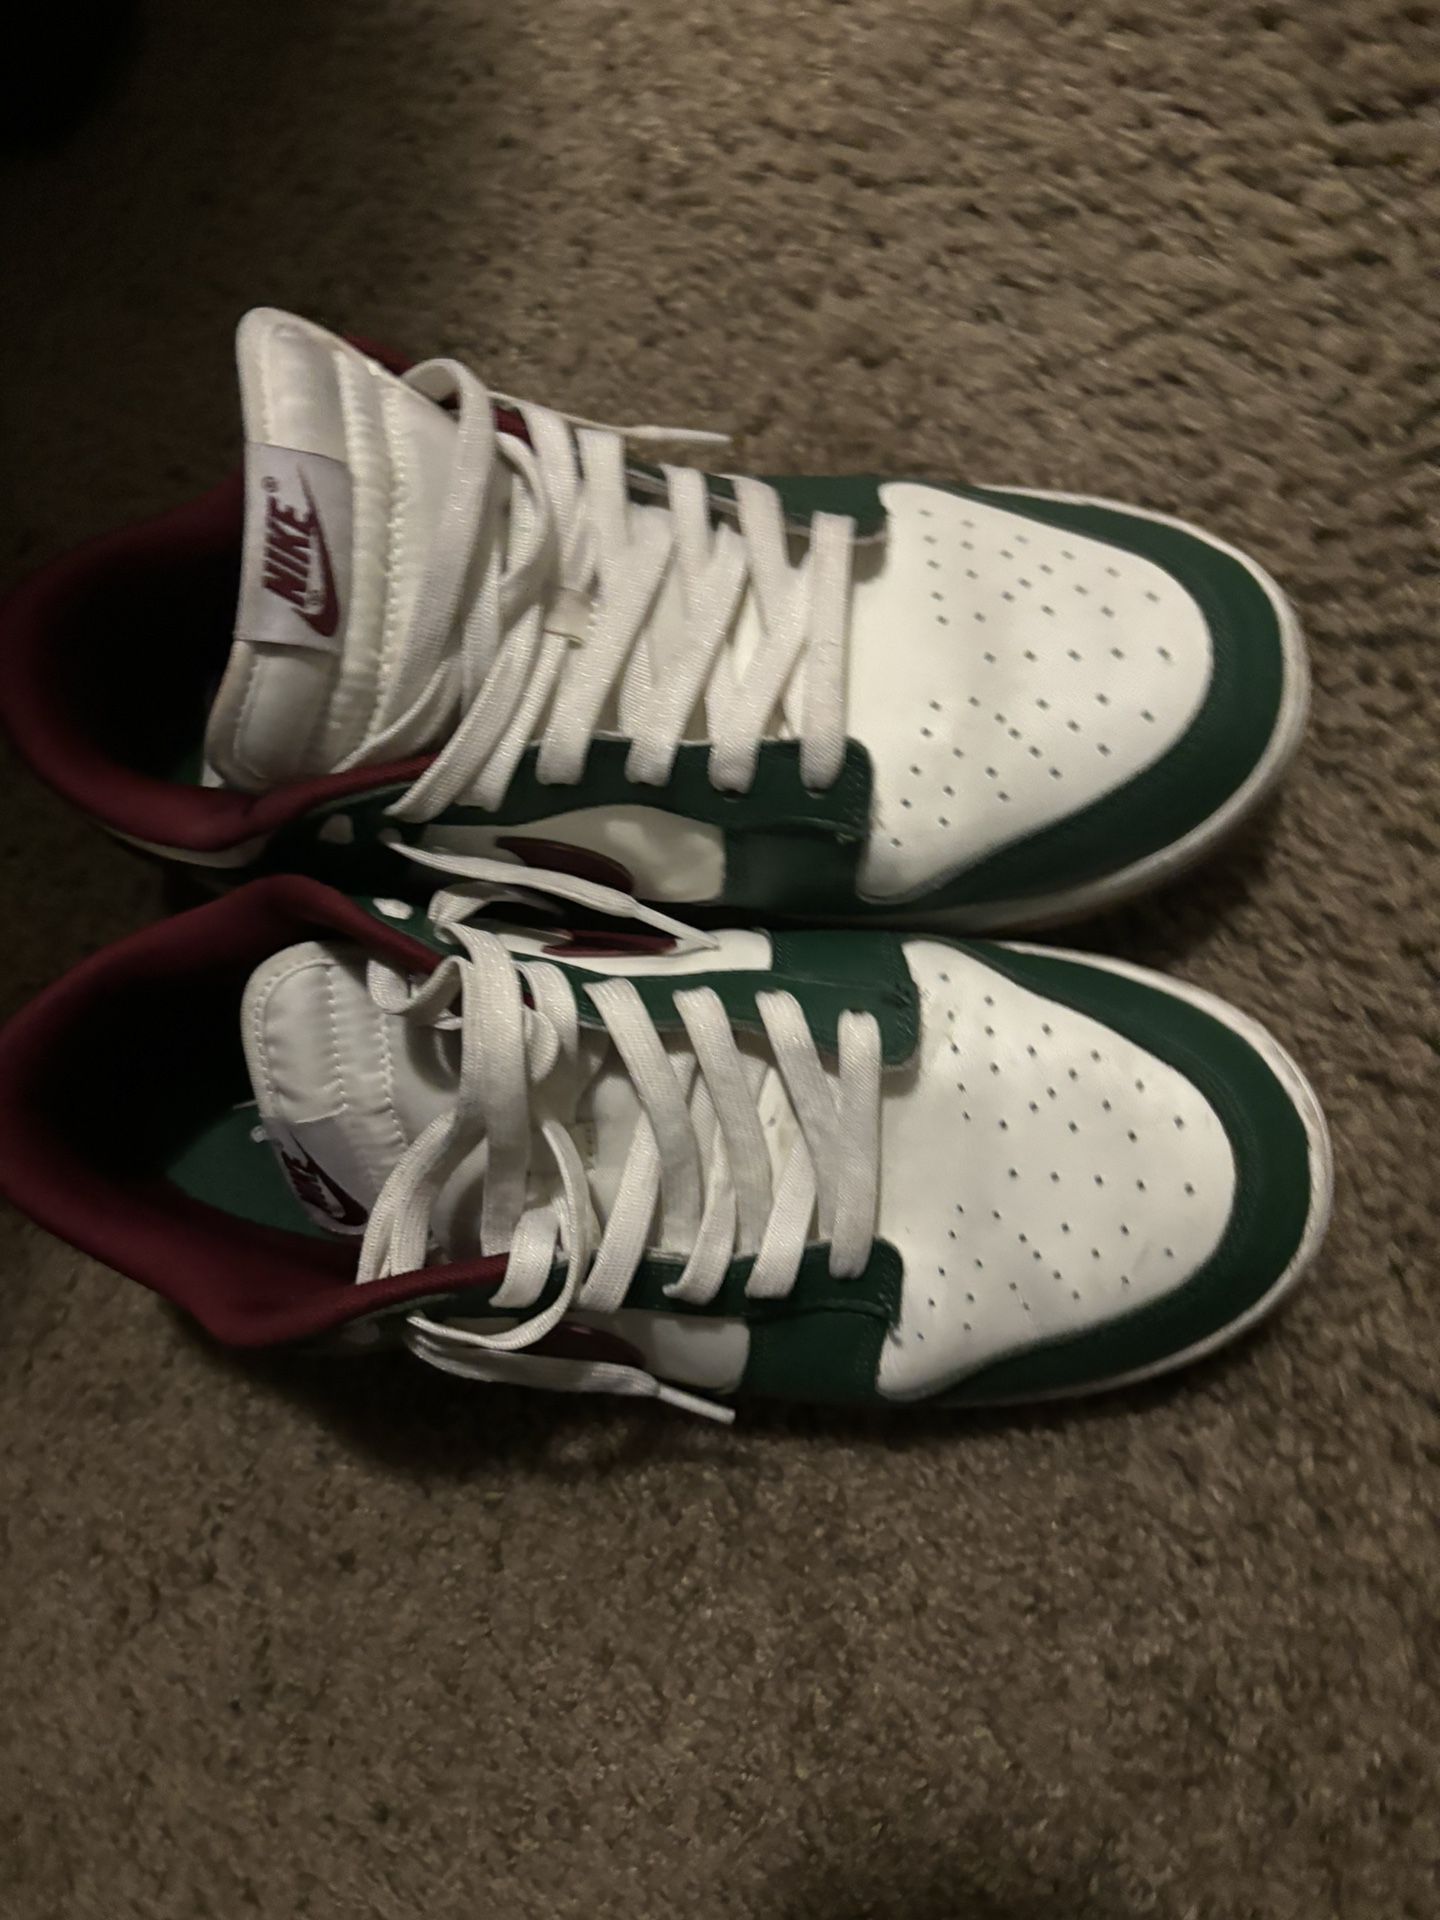 Gorge Green Nike Dunks For Sale!!! Text Me